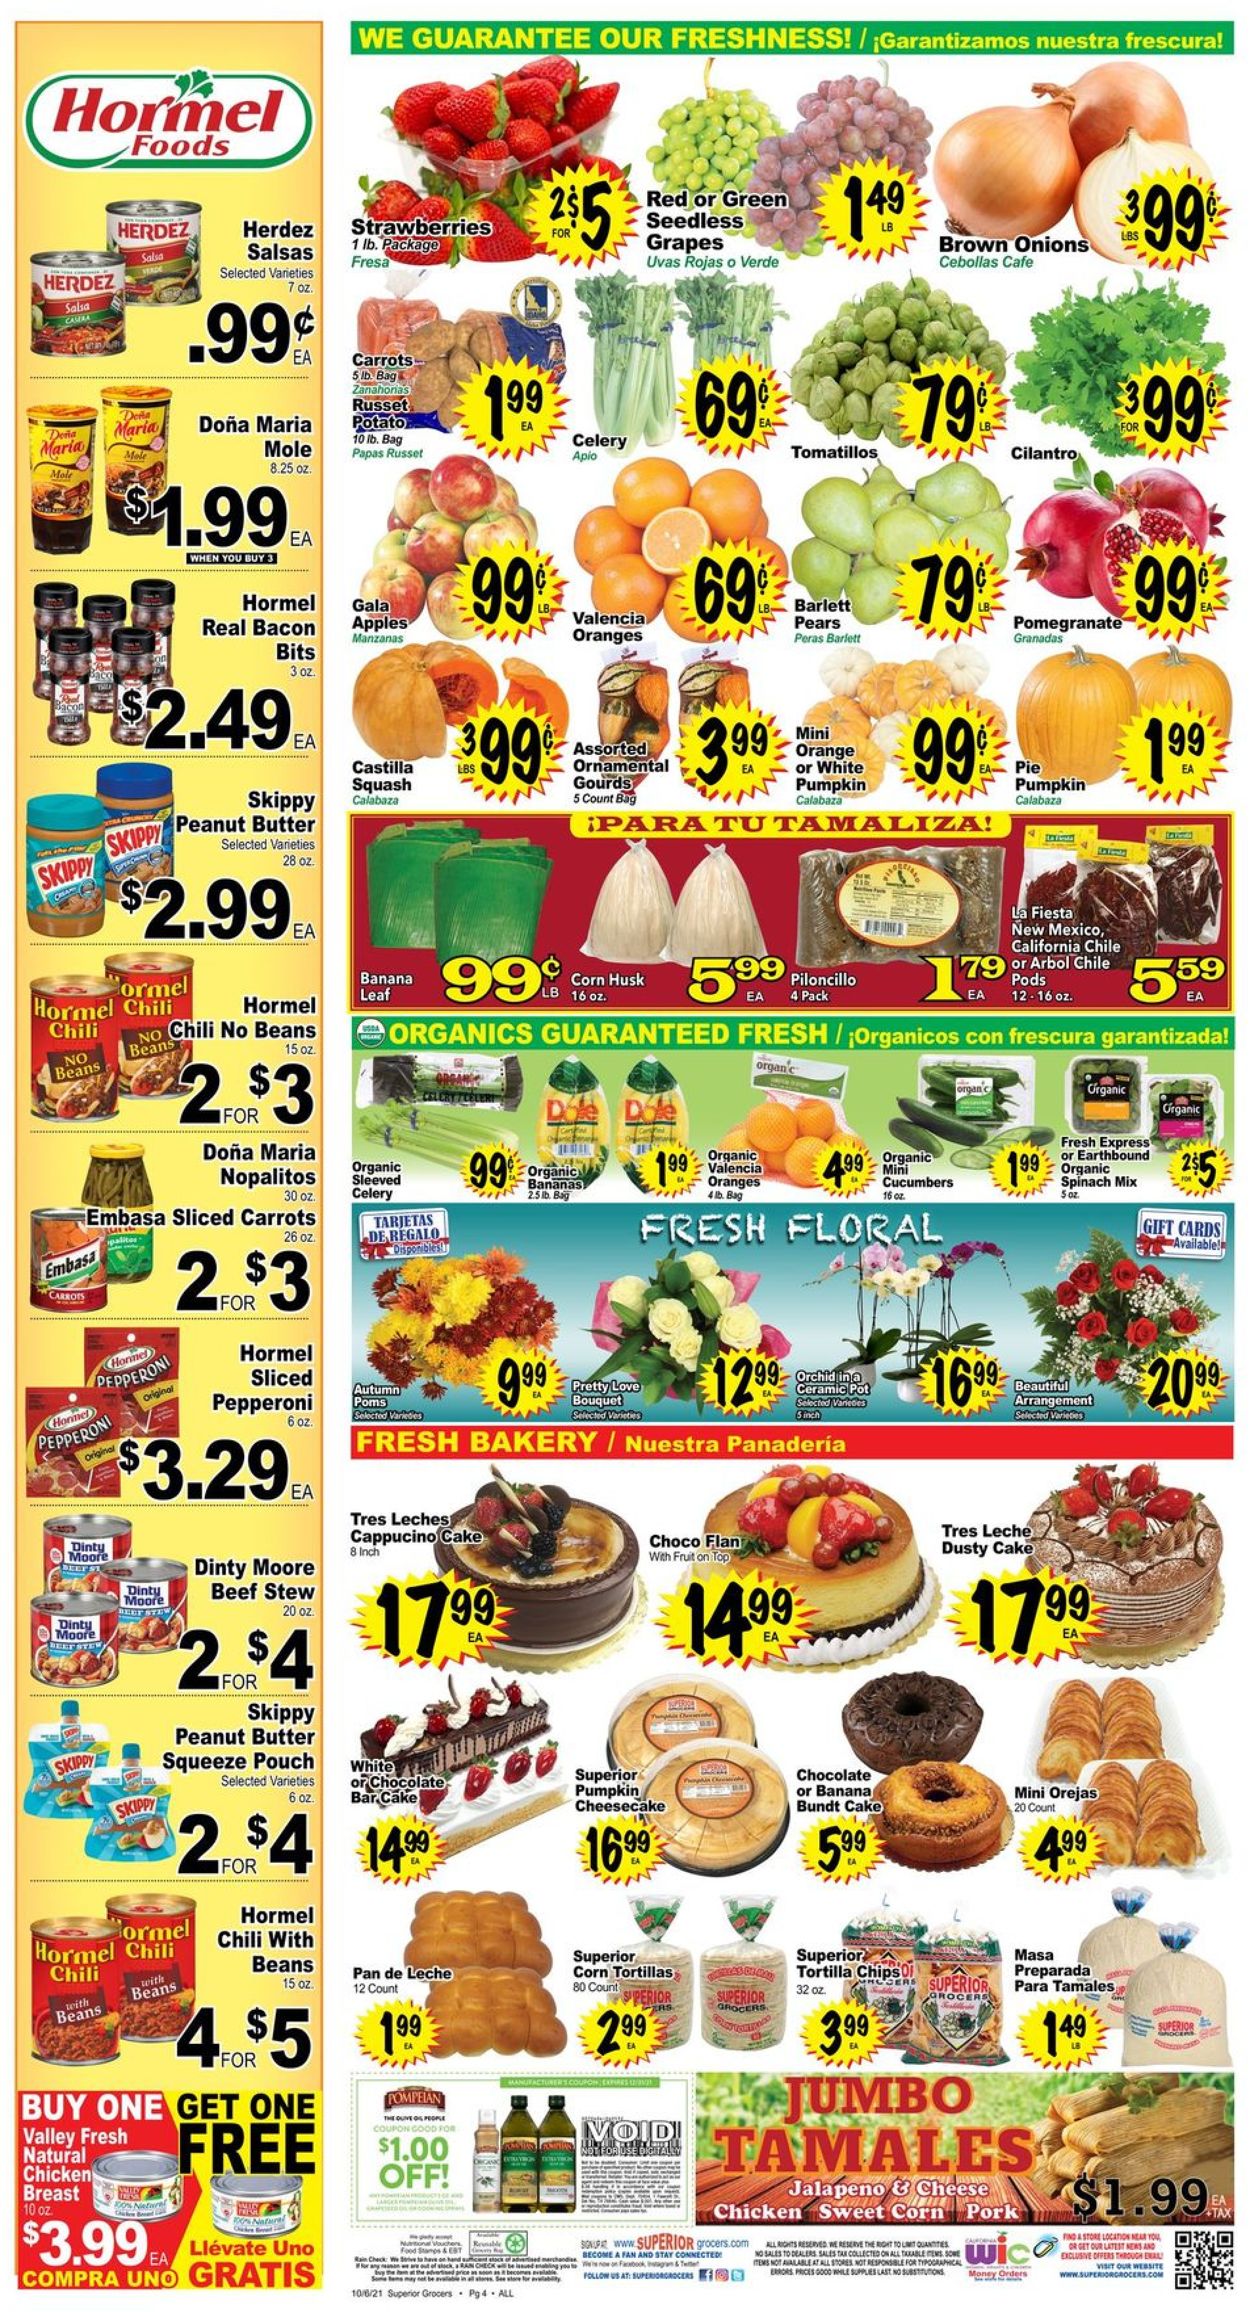 Catalogue Superior Grocers from 10/06/2021